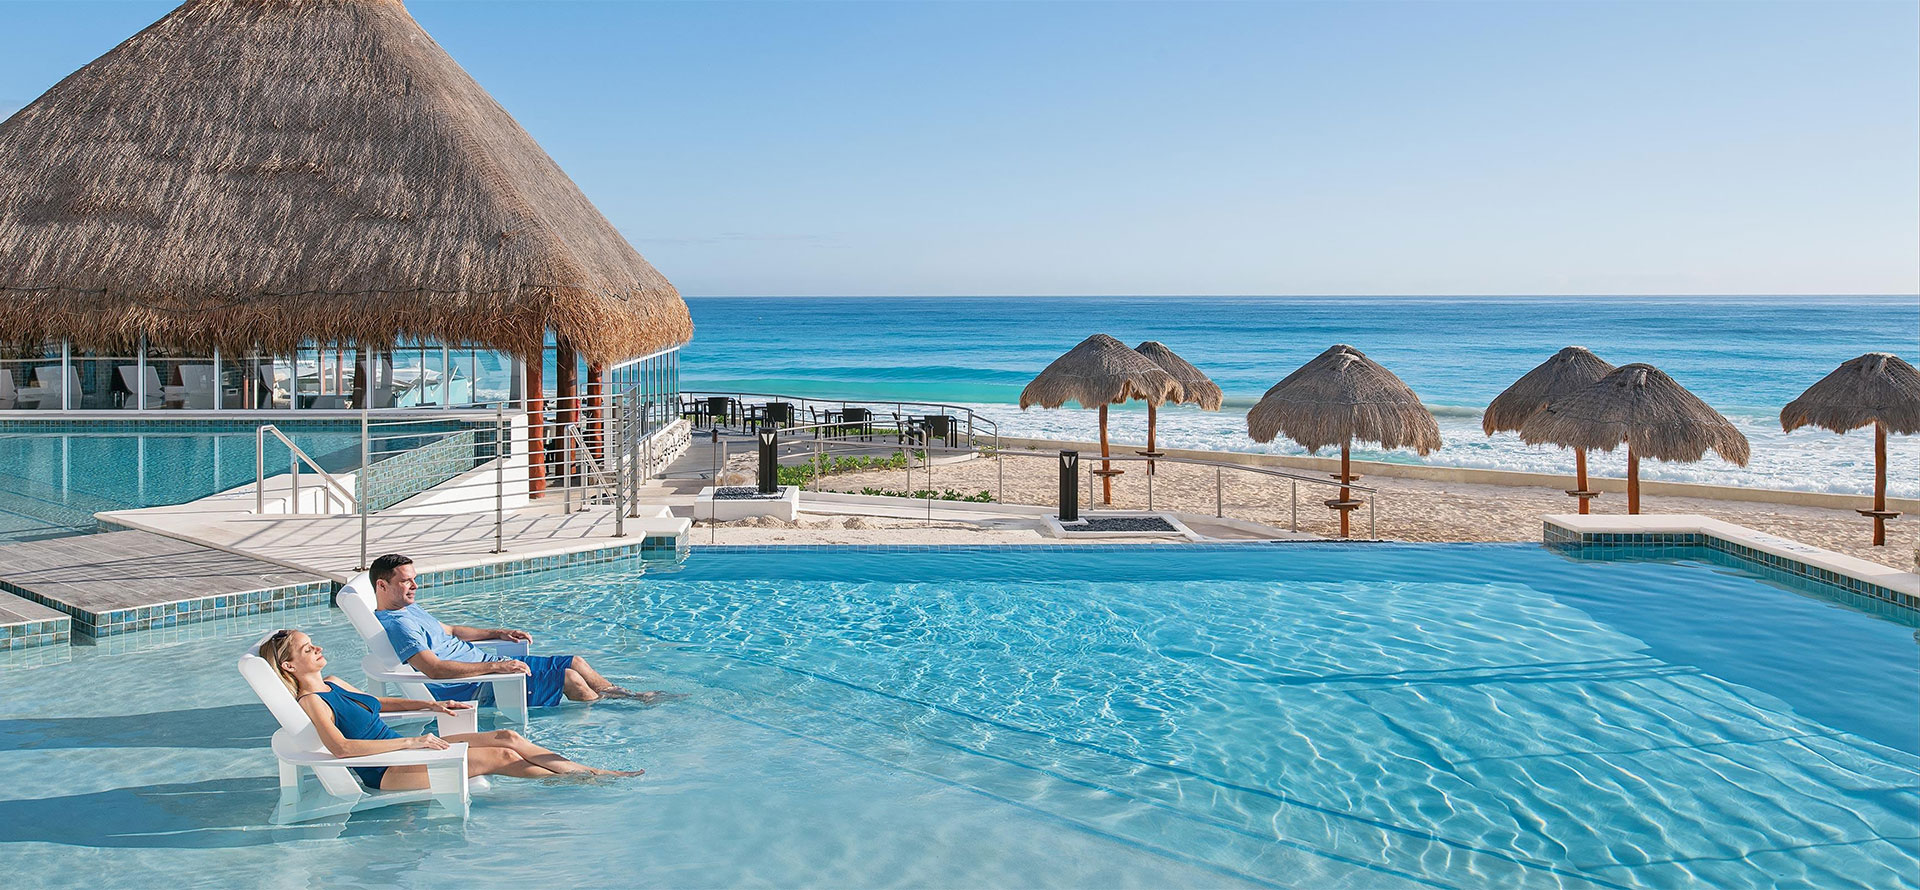 Cabo and cancun swimming pool.